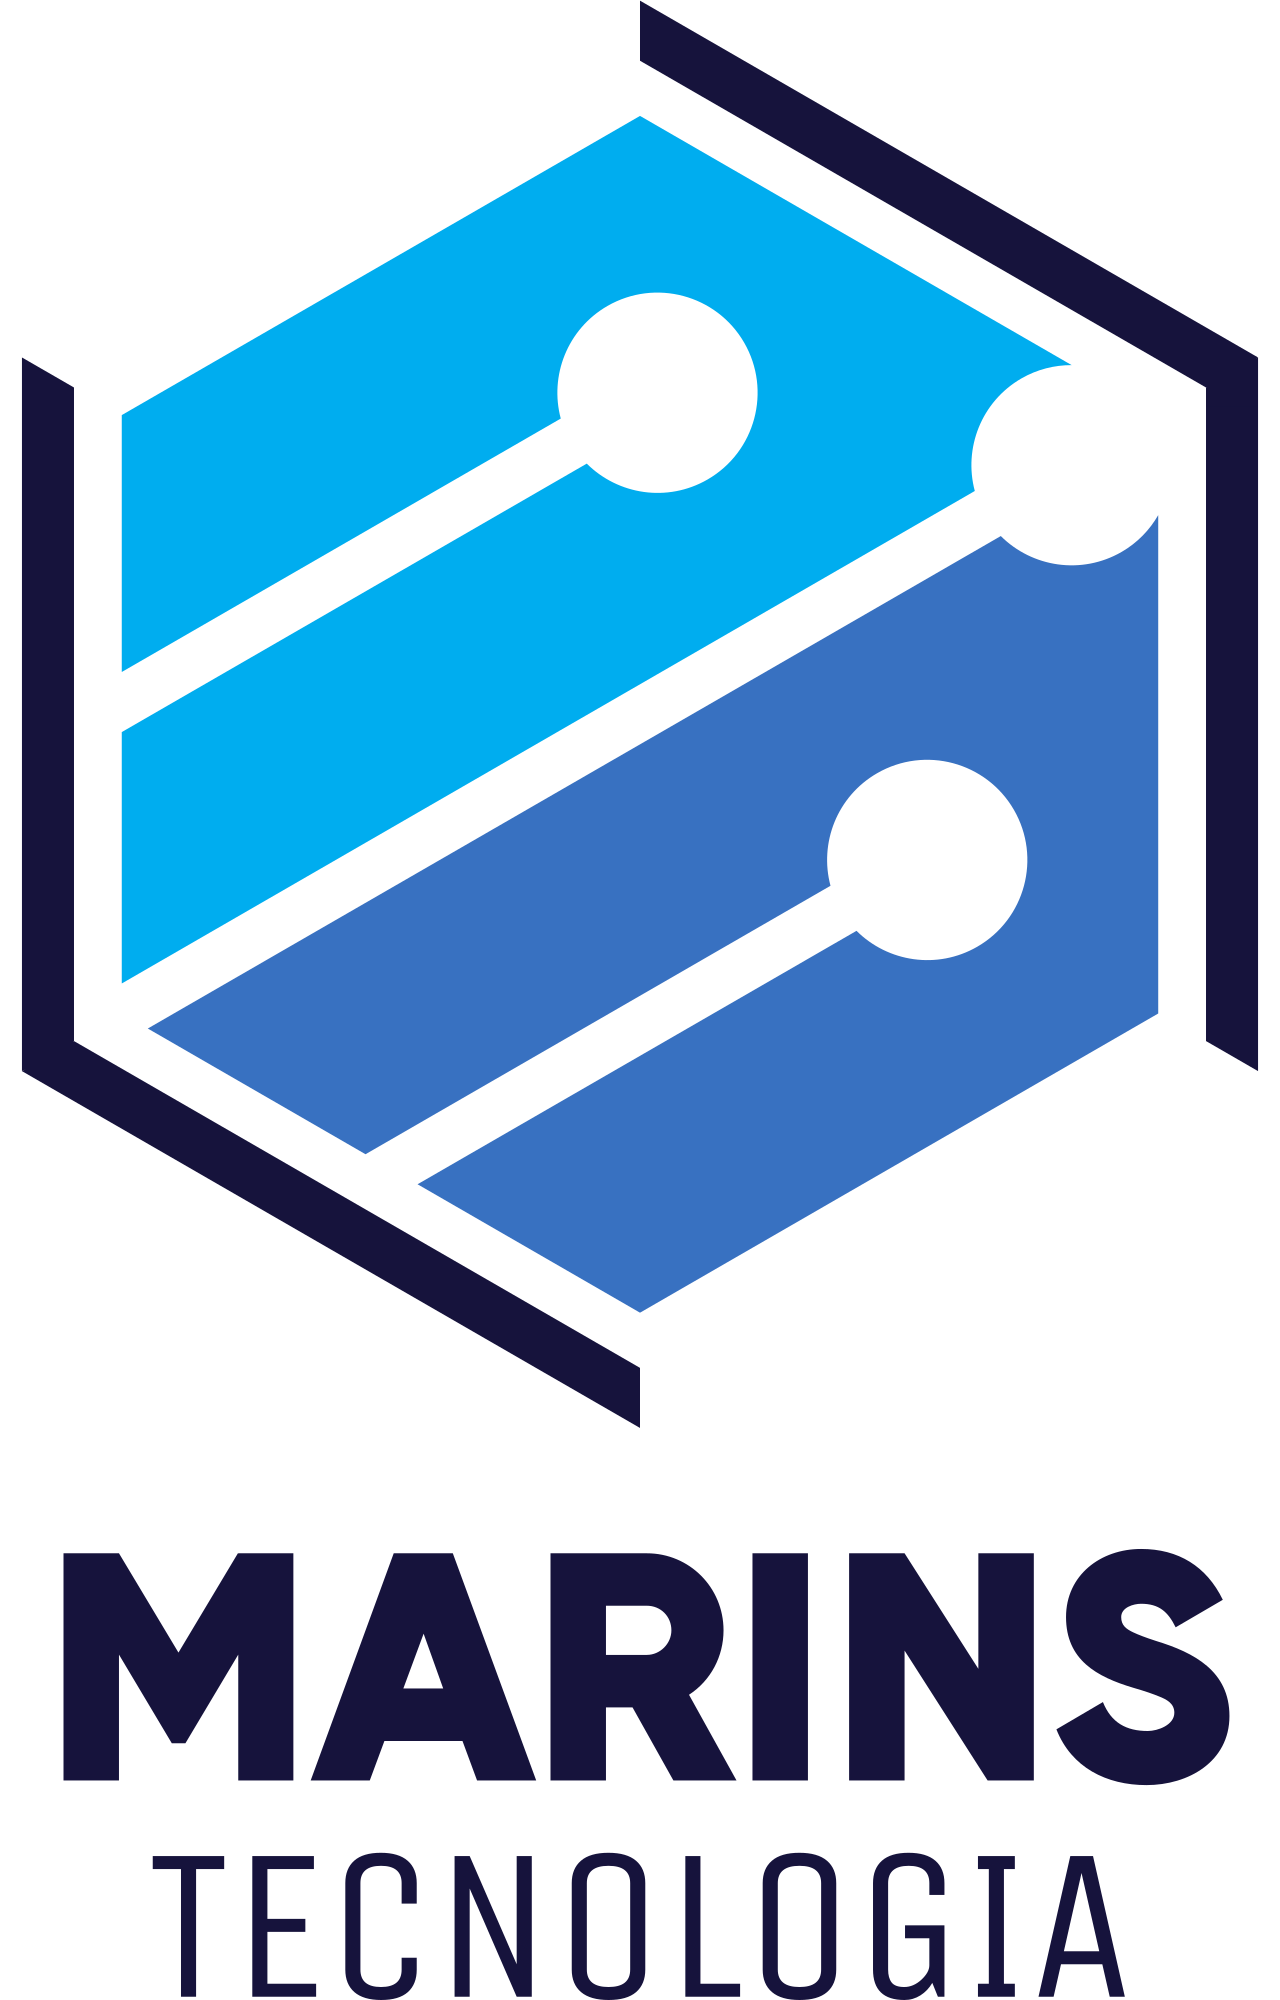 MARINS's web page